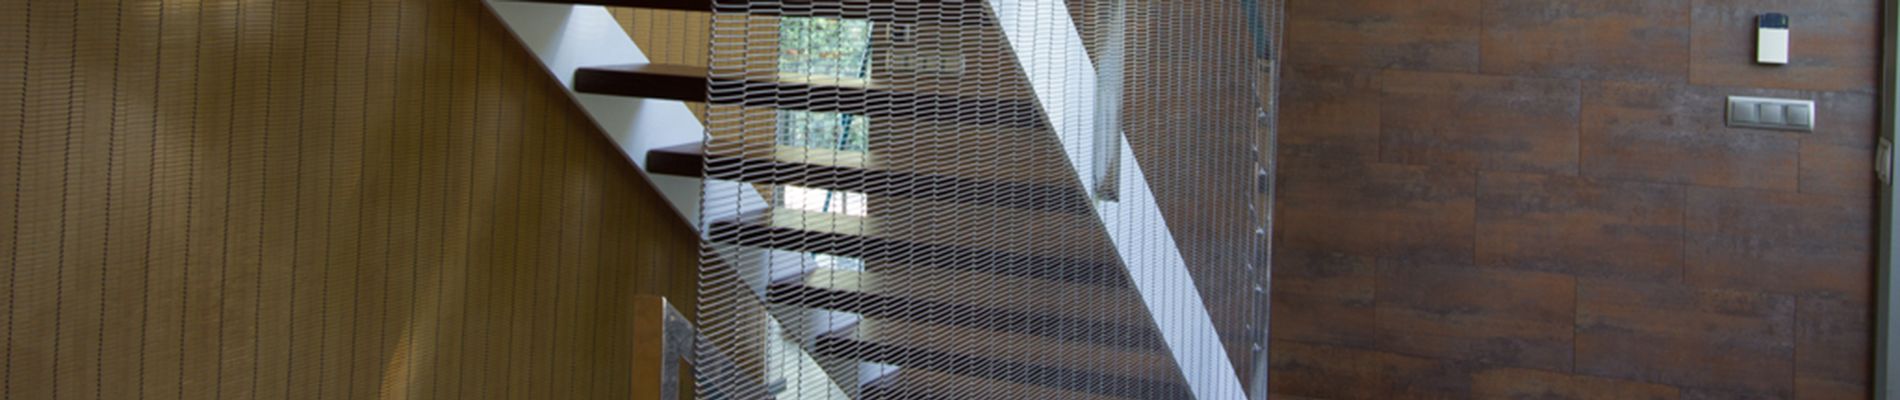 Metal mesh in an architectural project 